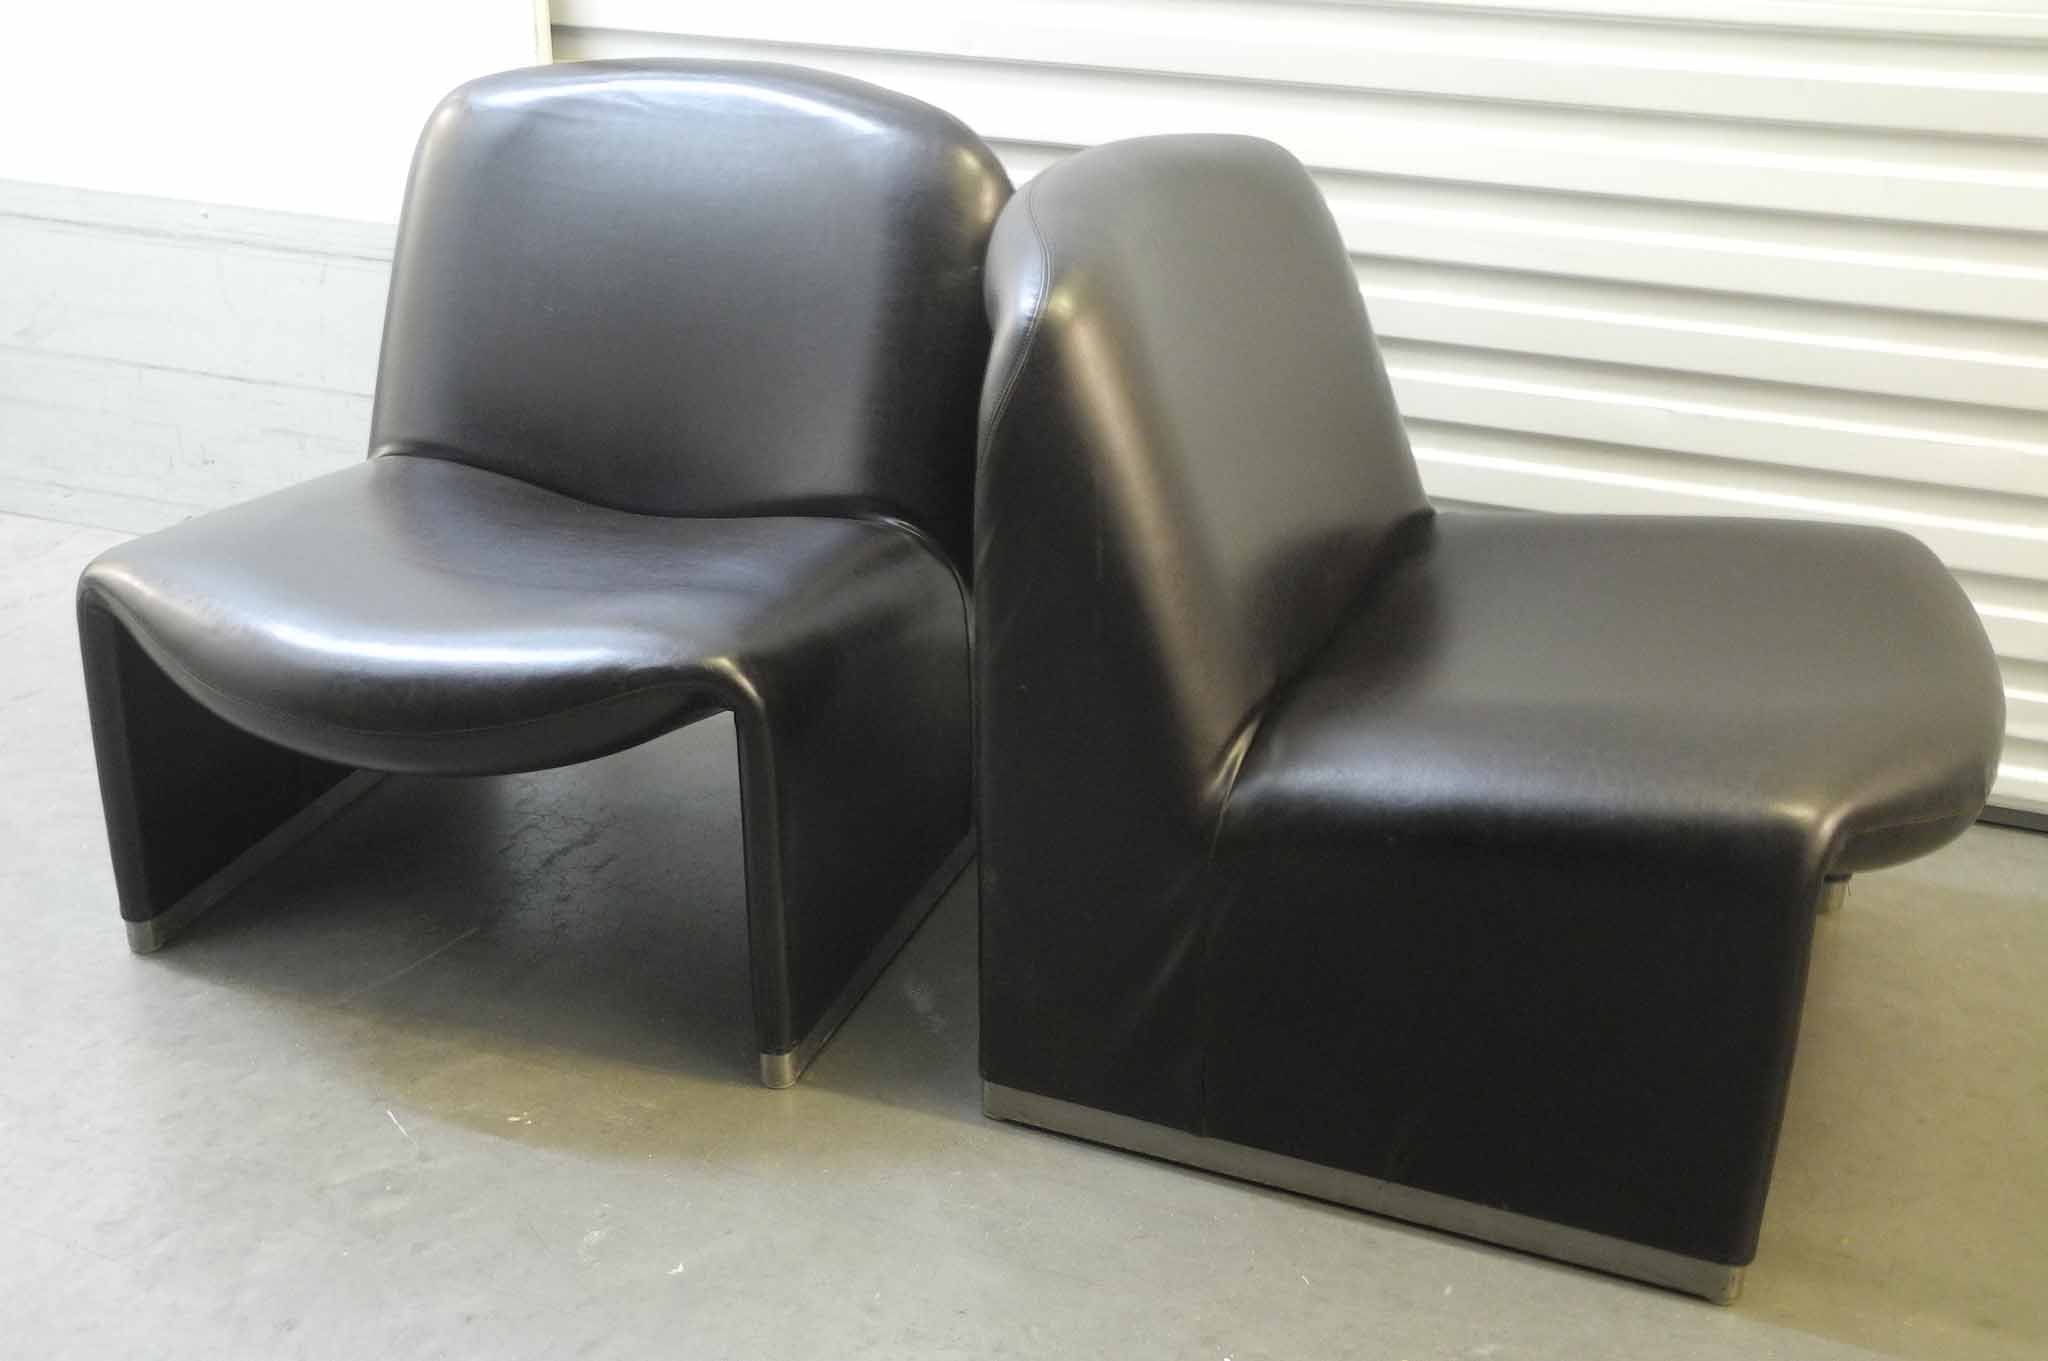 A pair of Alky chairs, by Giancarlo Piretti for Castelli, Italy, circa 1970, black faux leather